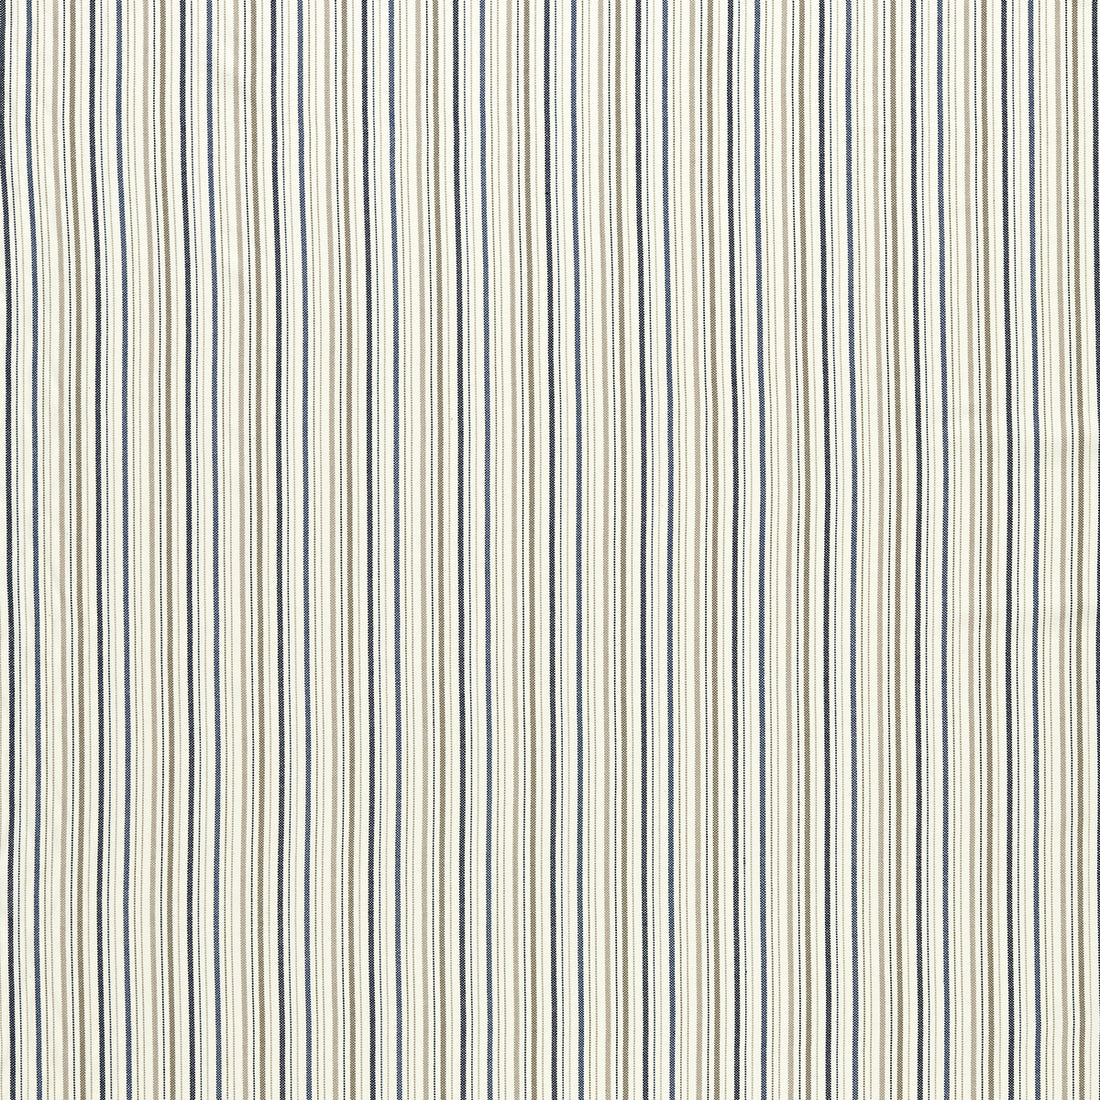 Maryland fabric in denim color - pattern F1501/02.CAC.0 - by Clarke And Clarke in the Clarke &amp; Clarke Edgeworth collection